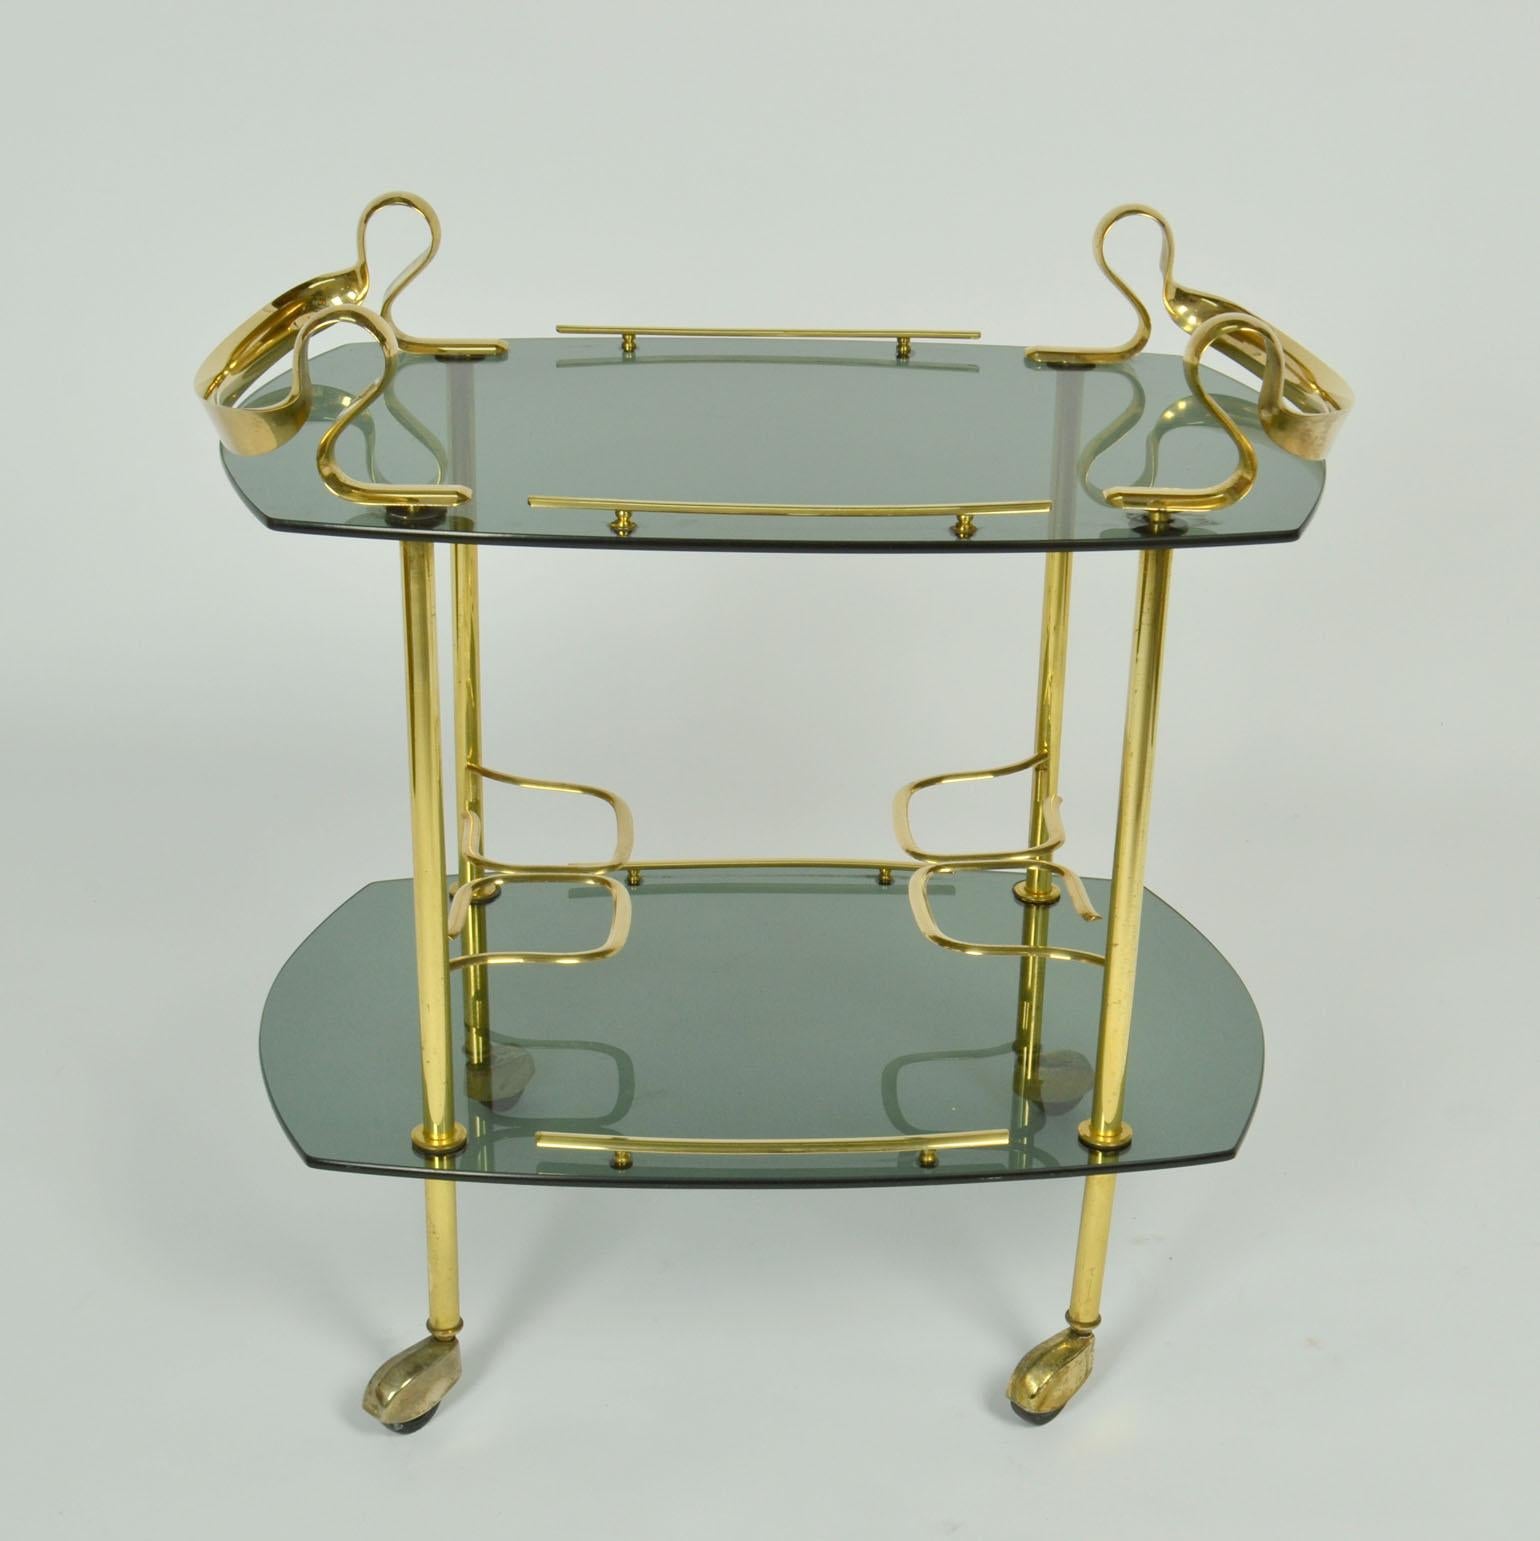 This is an unusual elegant bar cart, cocktail or serving trolley in brass and smoked glass Italy circa 1960's. The sculptural  design celebrates social gatherings with the curvaceous serpentine brass handles and arched cut glass trays. 